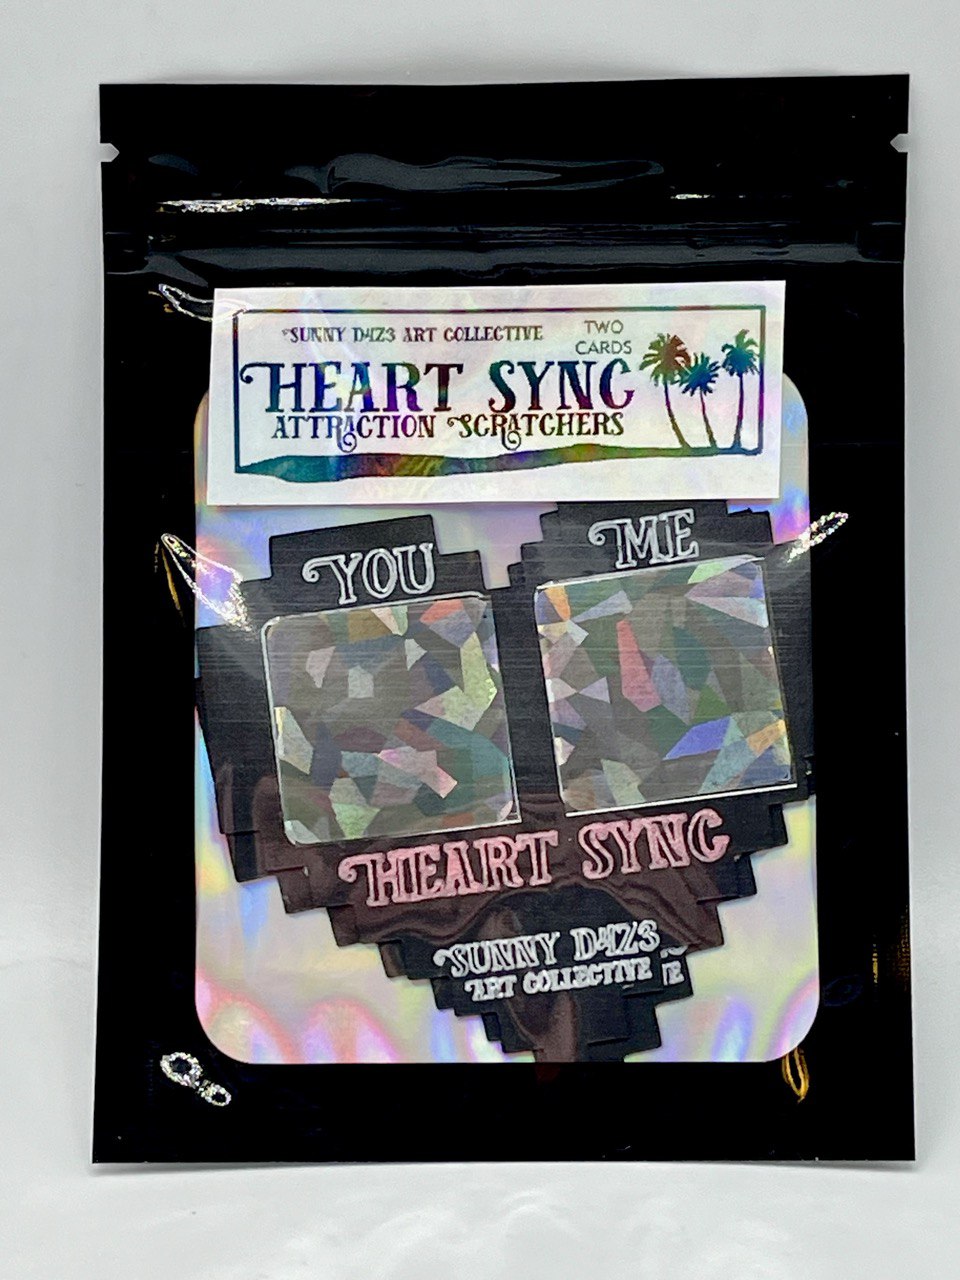 heart sync black heart scratch off cards in packaging.